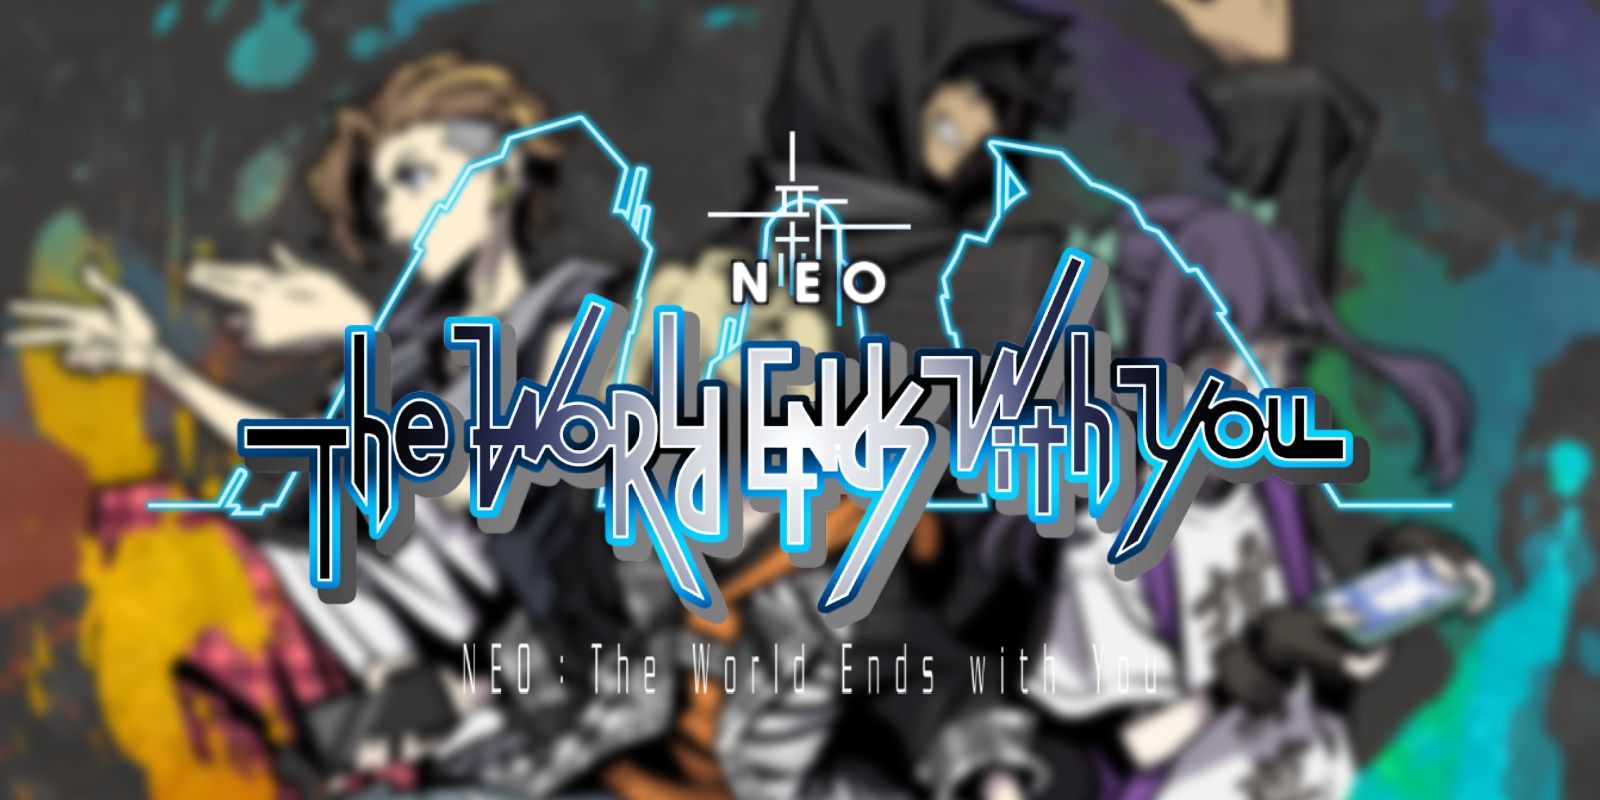 How long is NEO: The World Ends with You?